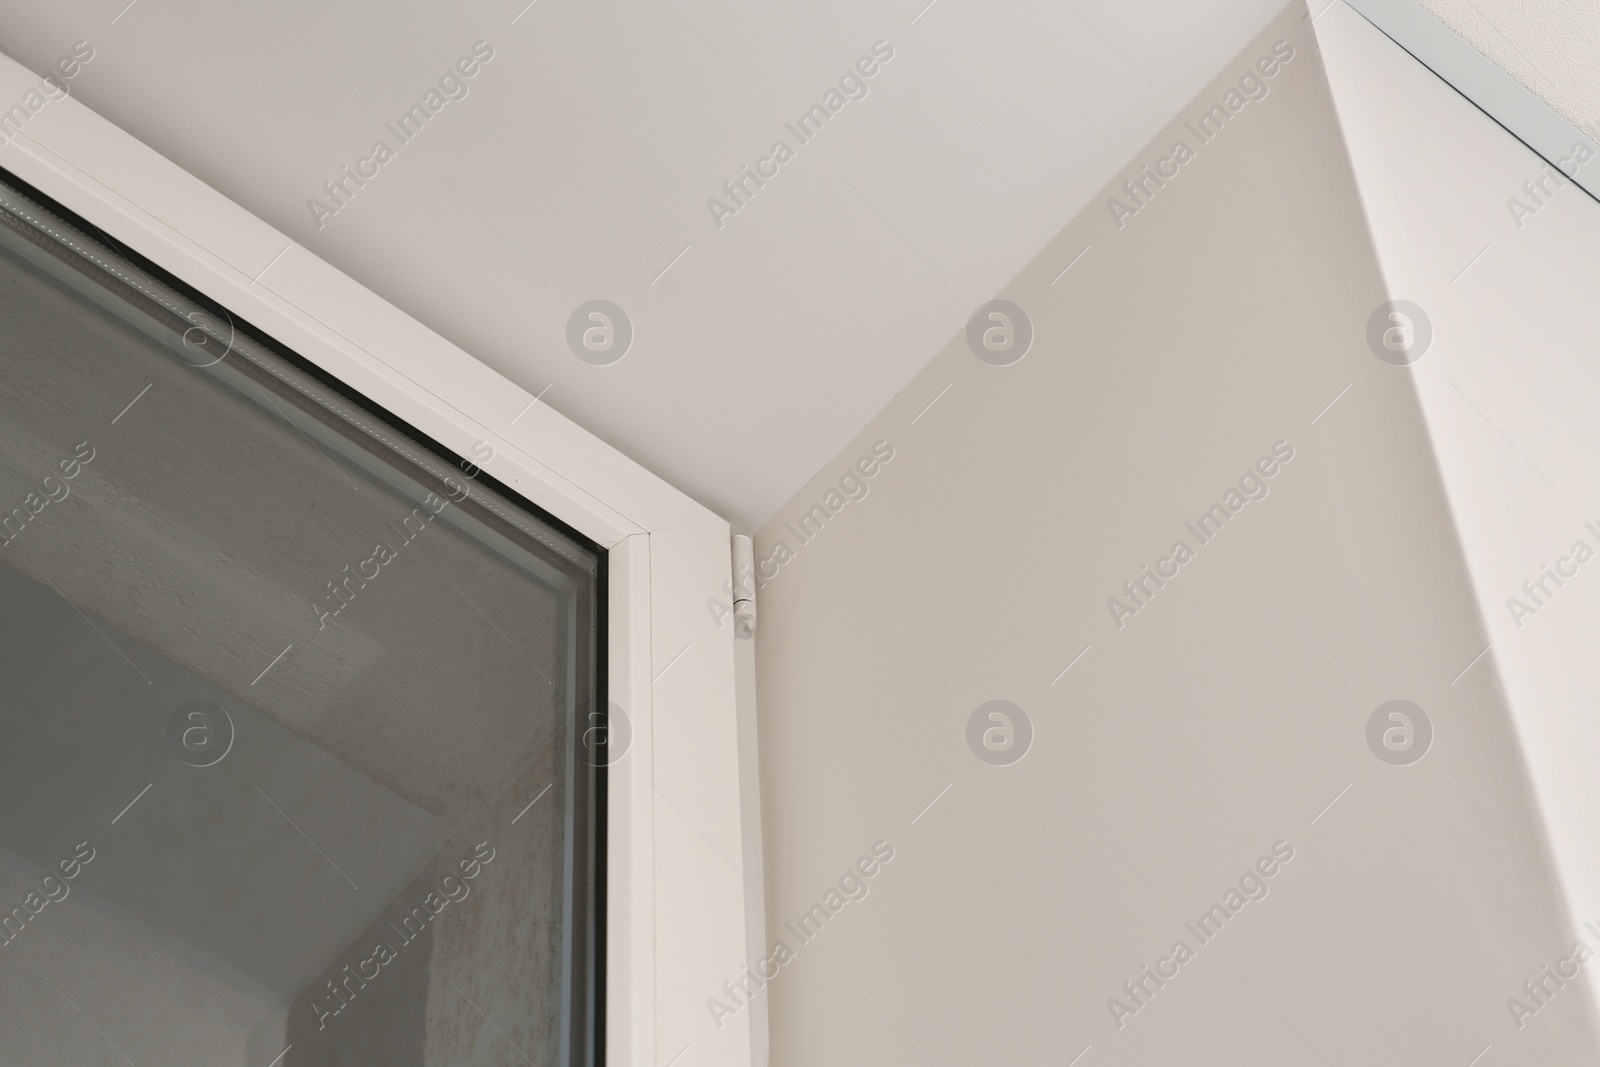 Photo of Glass plastic window near white wall indoors, low angle view